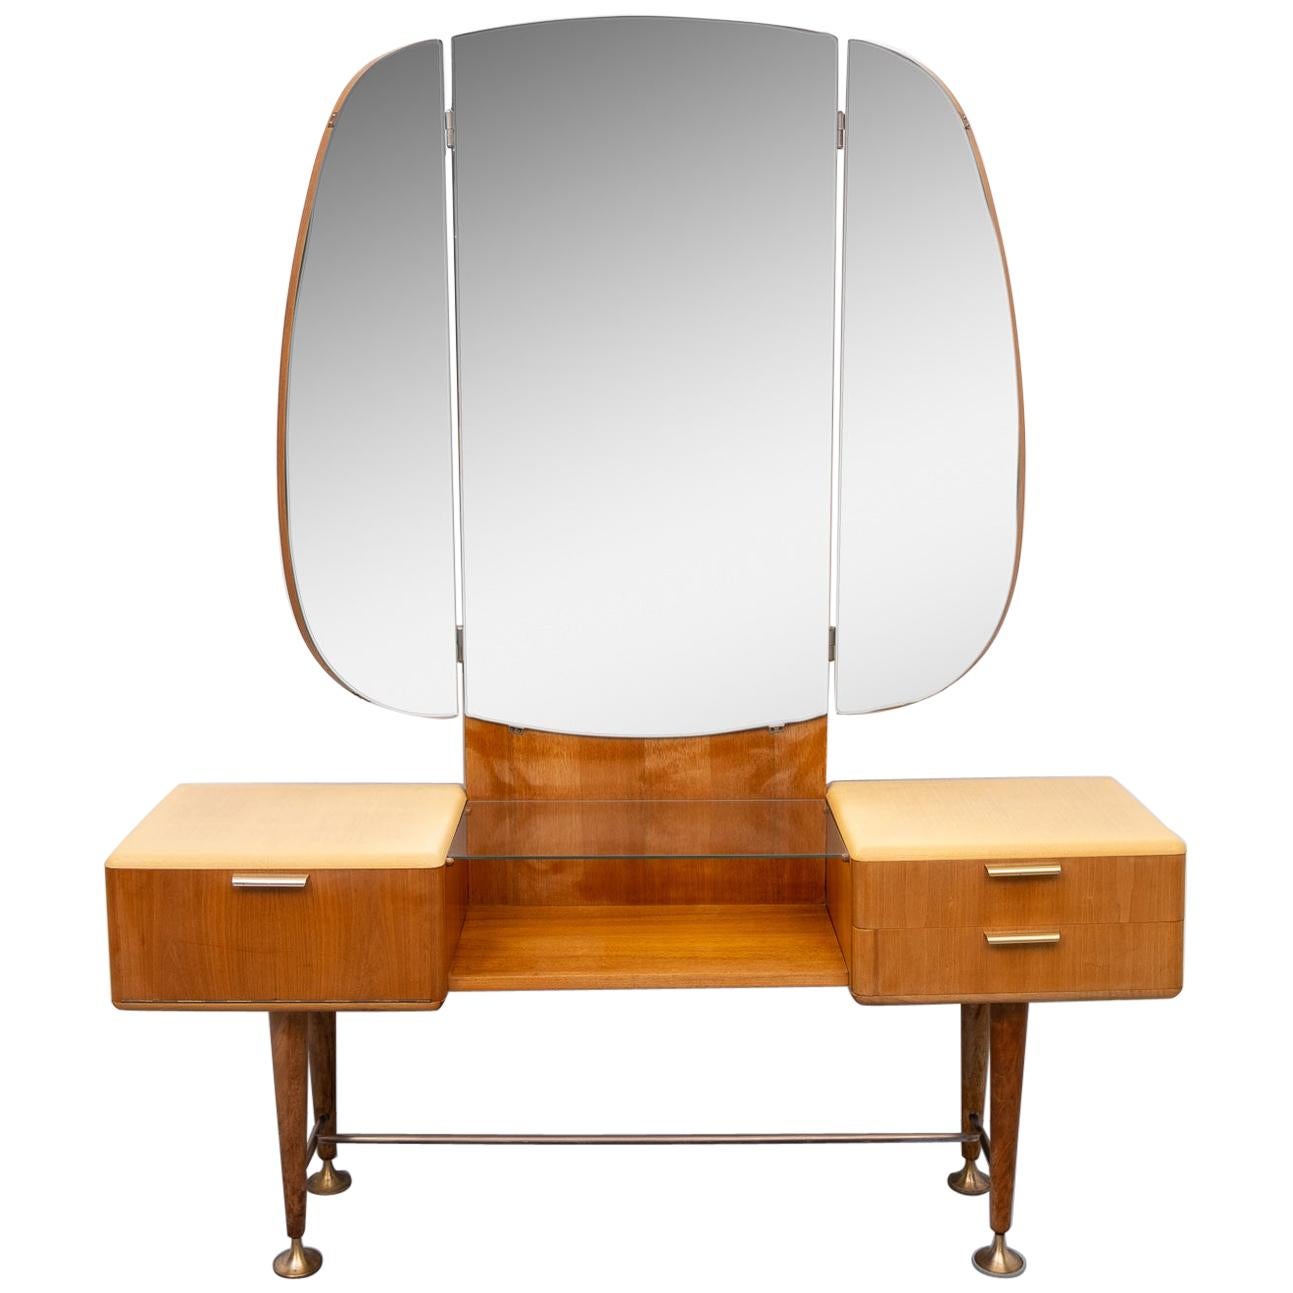  Abraham A. Patijn Dressing Table, 1950s